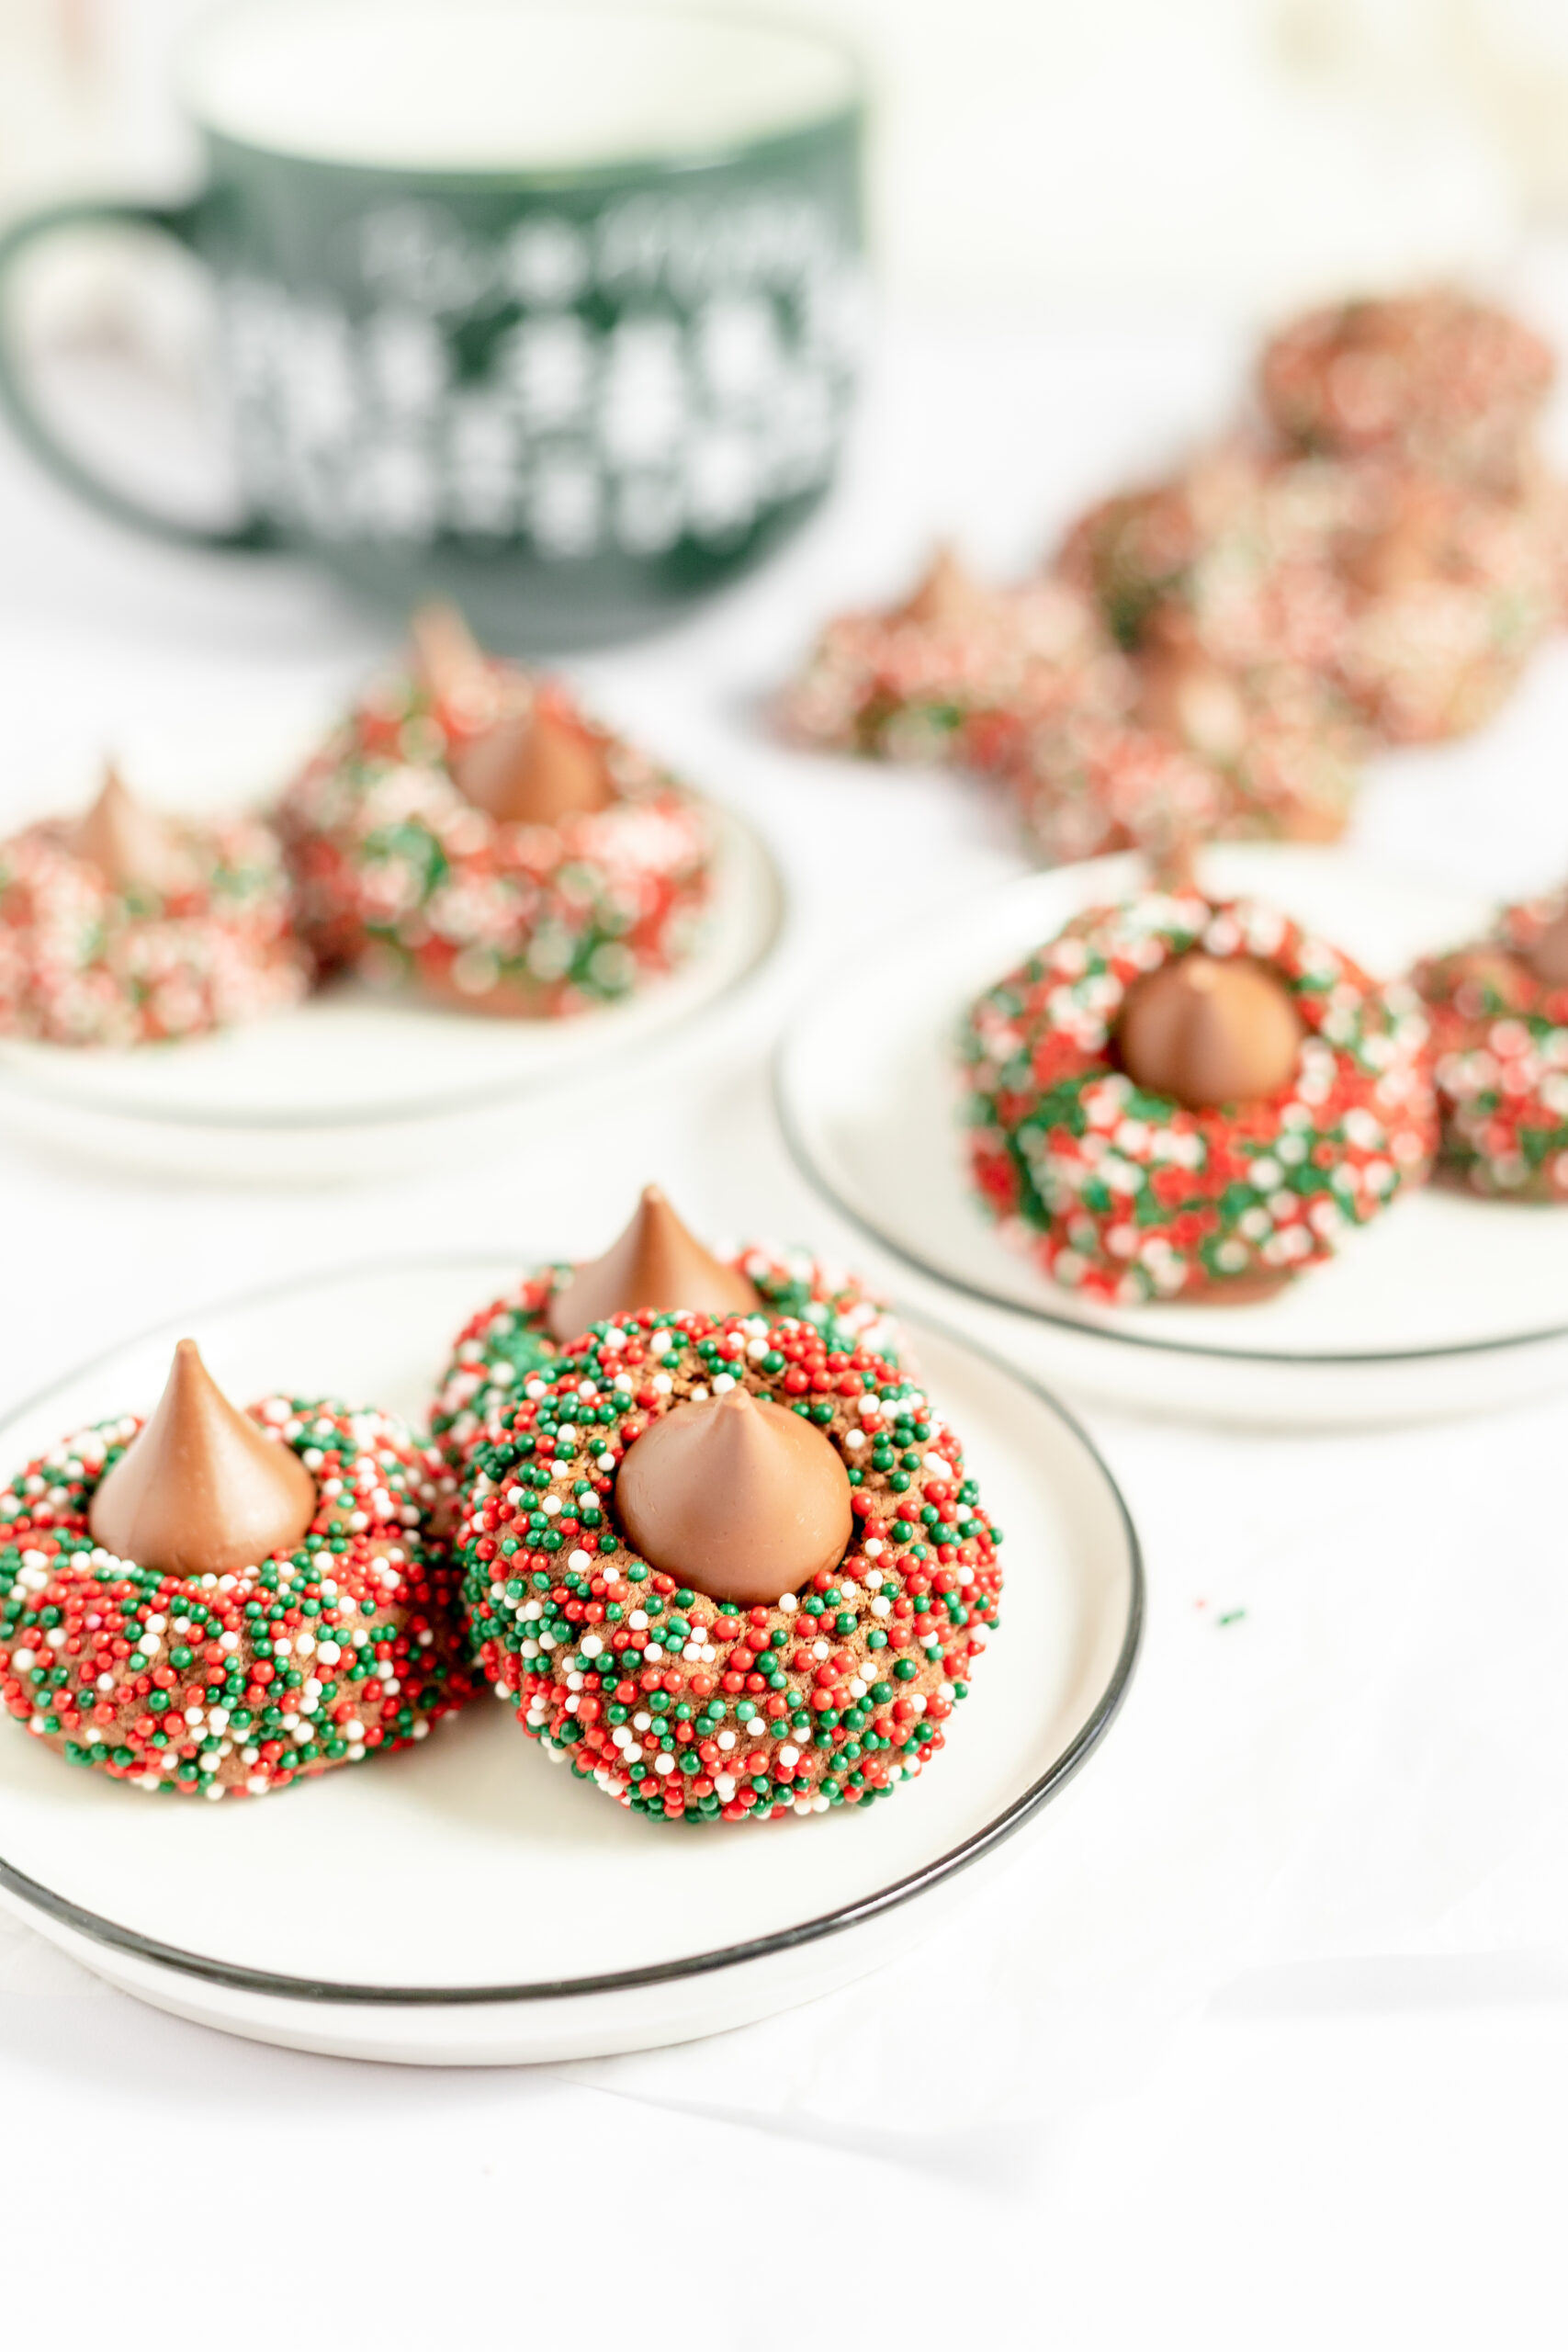 Four white plates with 3 chocolate cookies on each plate. The cookies are small, round and dipped in red, white and green sprinkles with a chocolate Hershey's kiss on top.